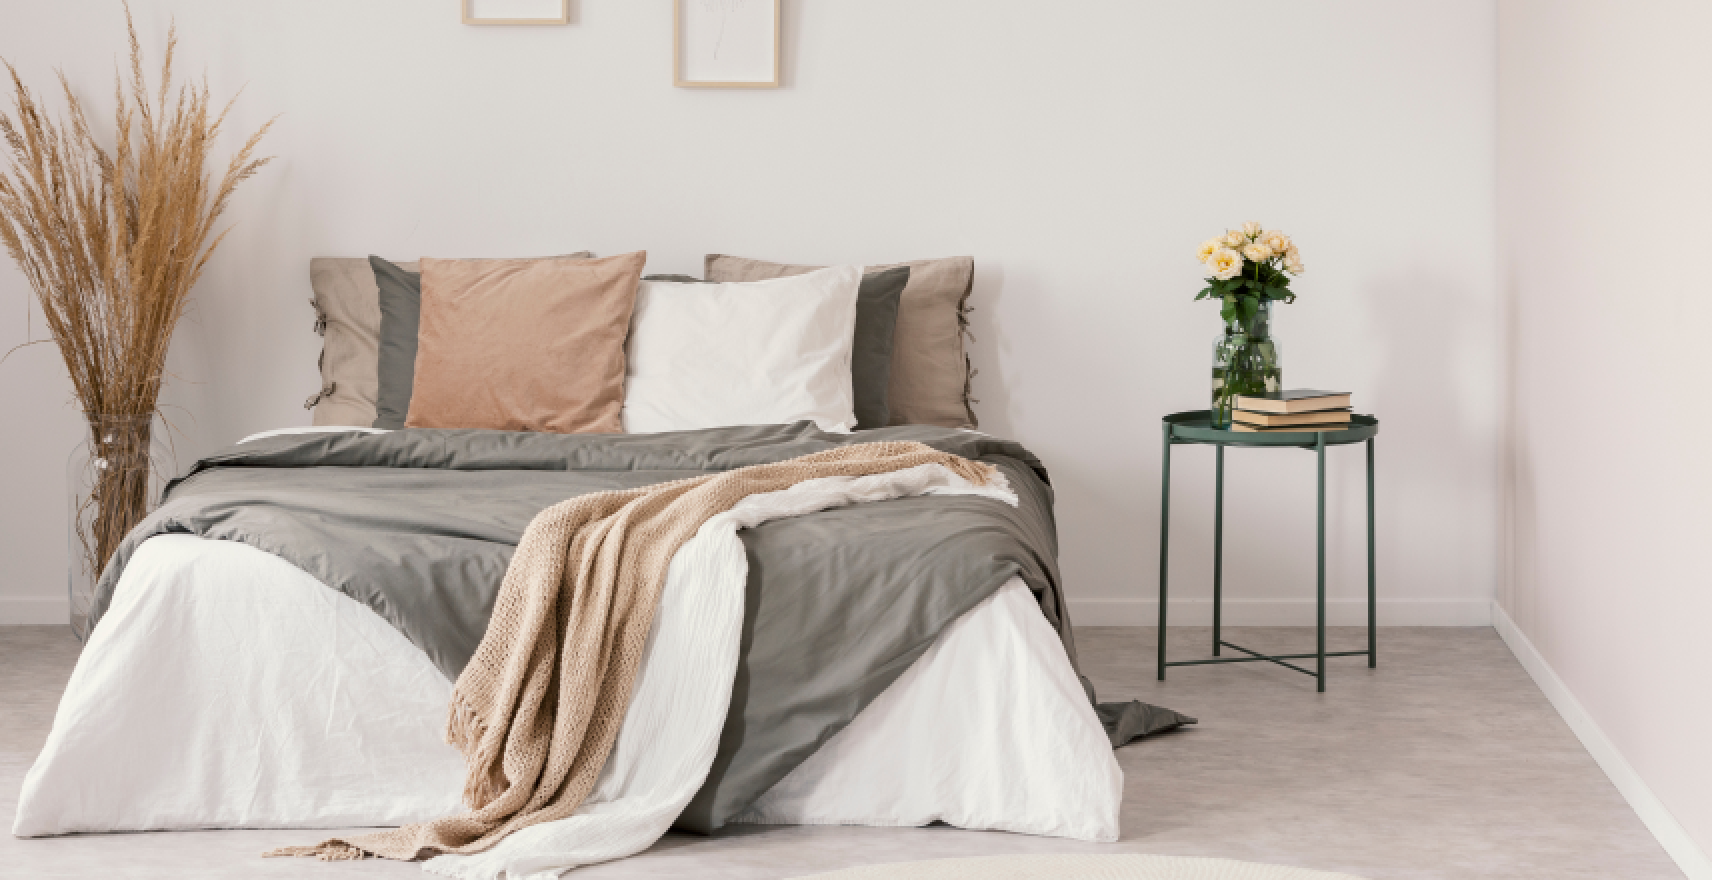 A guide to choosing the right bedding